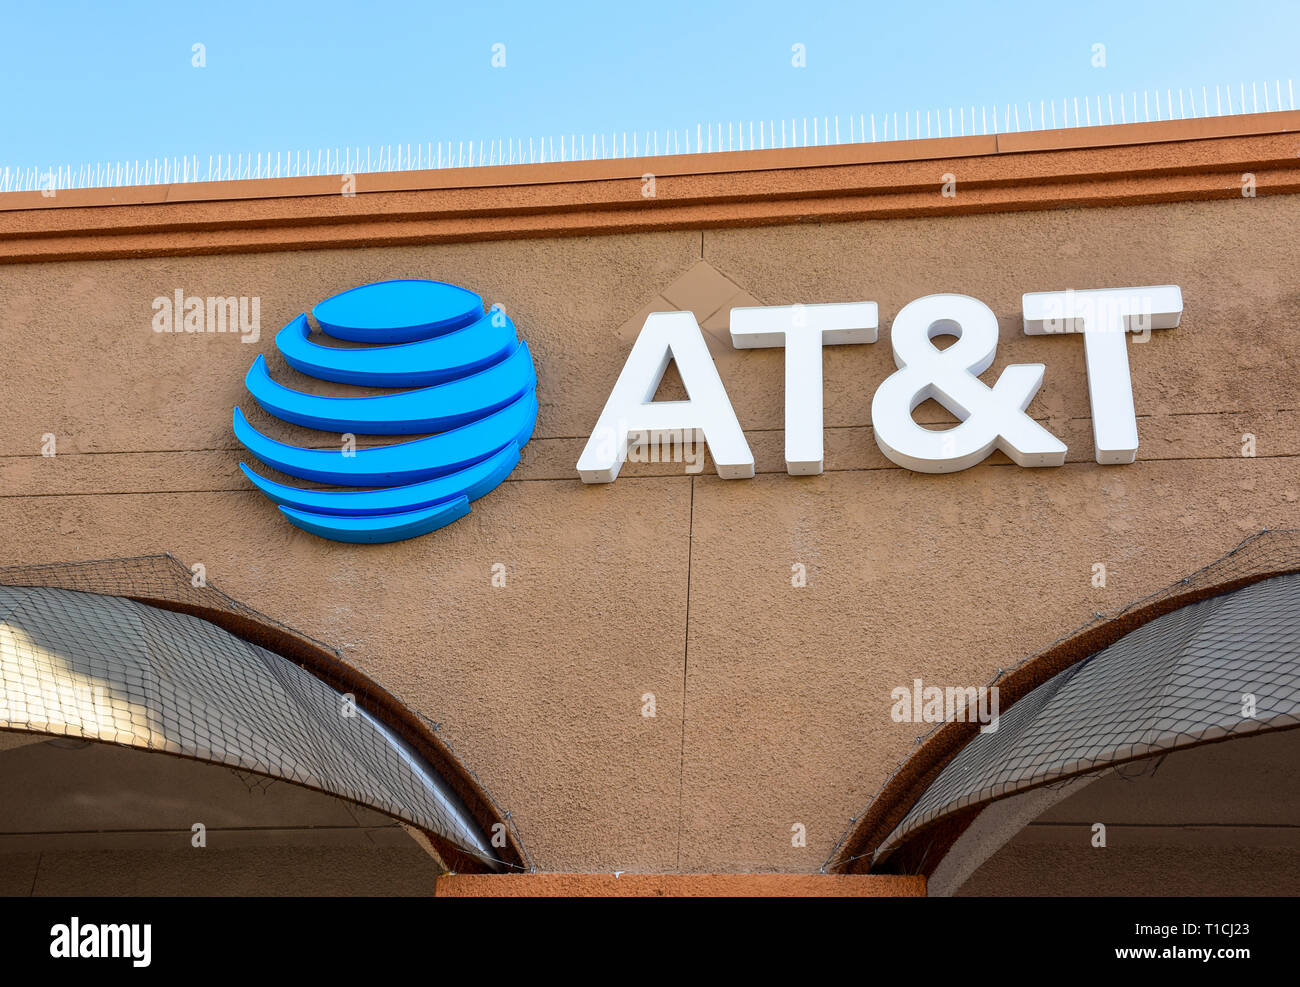 At&t storefront in Las Vegas at night Stock Photo